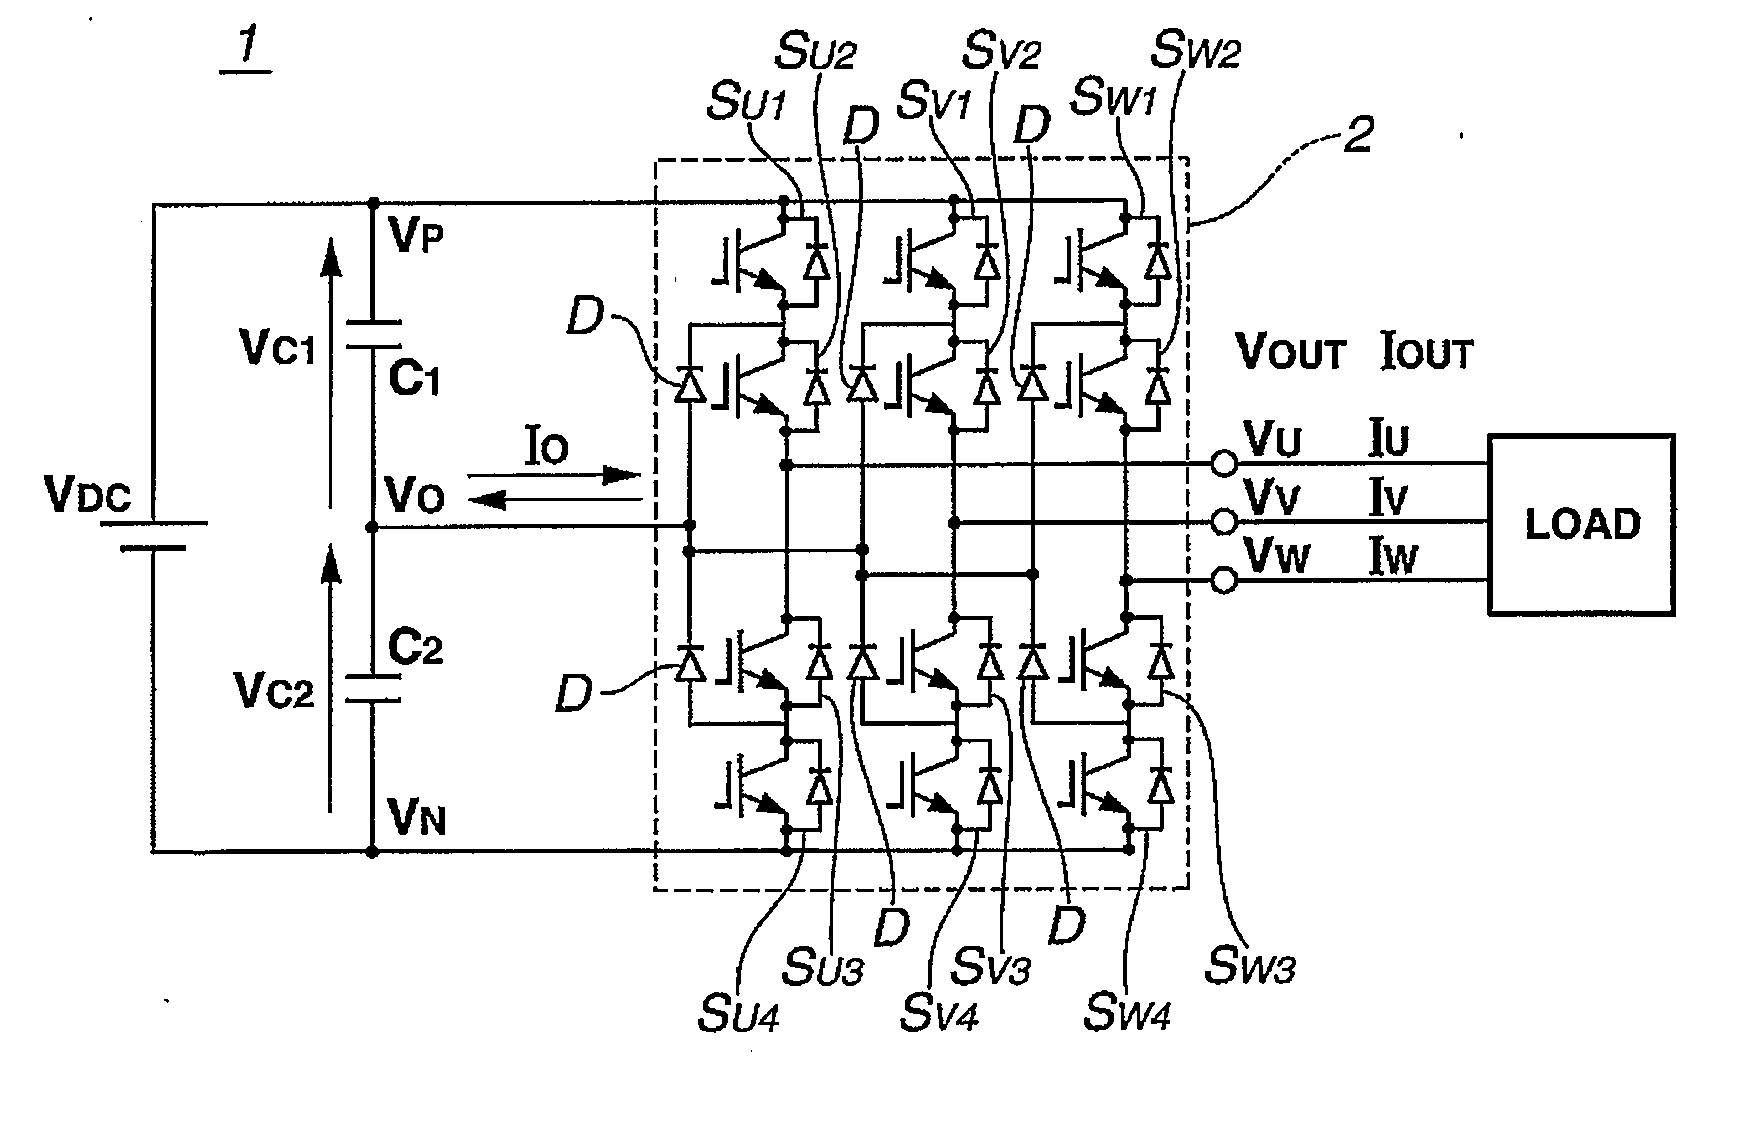 Neutral-point-clamped multilevel power conversion device